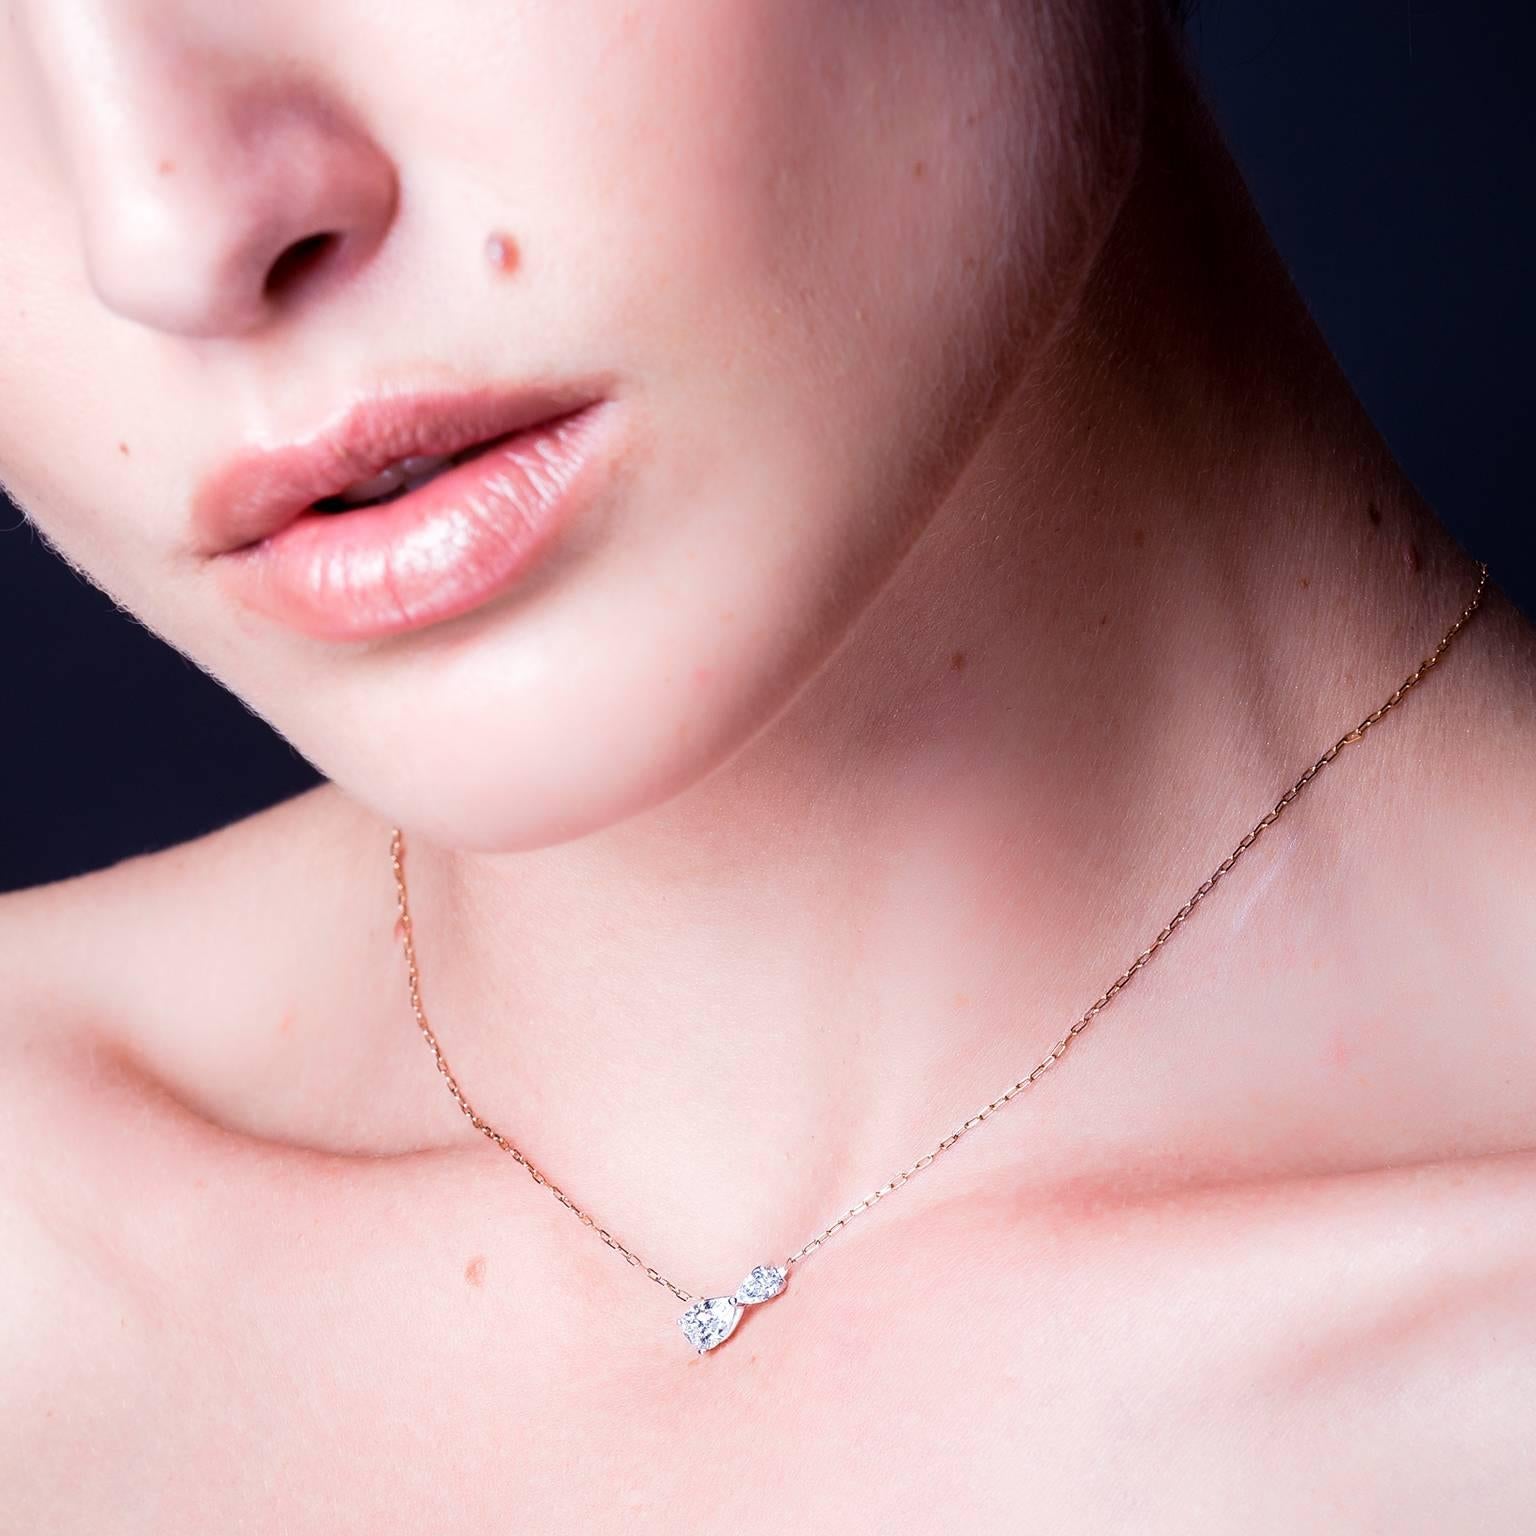 Inspired by the sign of infinity and the graceful lines of pear cut diamonds, this beautiful, feminine diamond necklace is handmade in 18 karat white gold. Suspended on a fine, sparkling 18 karat rose gold chain, it creates an impression of the